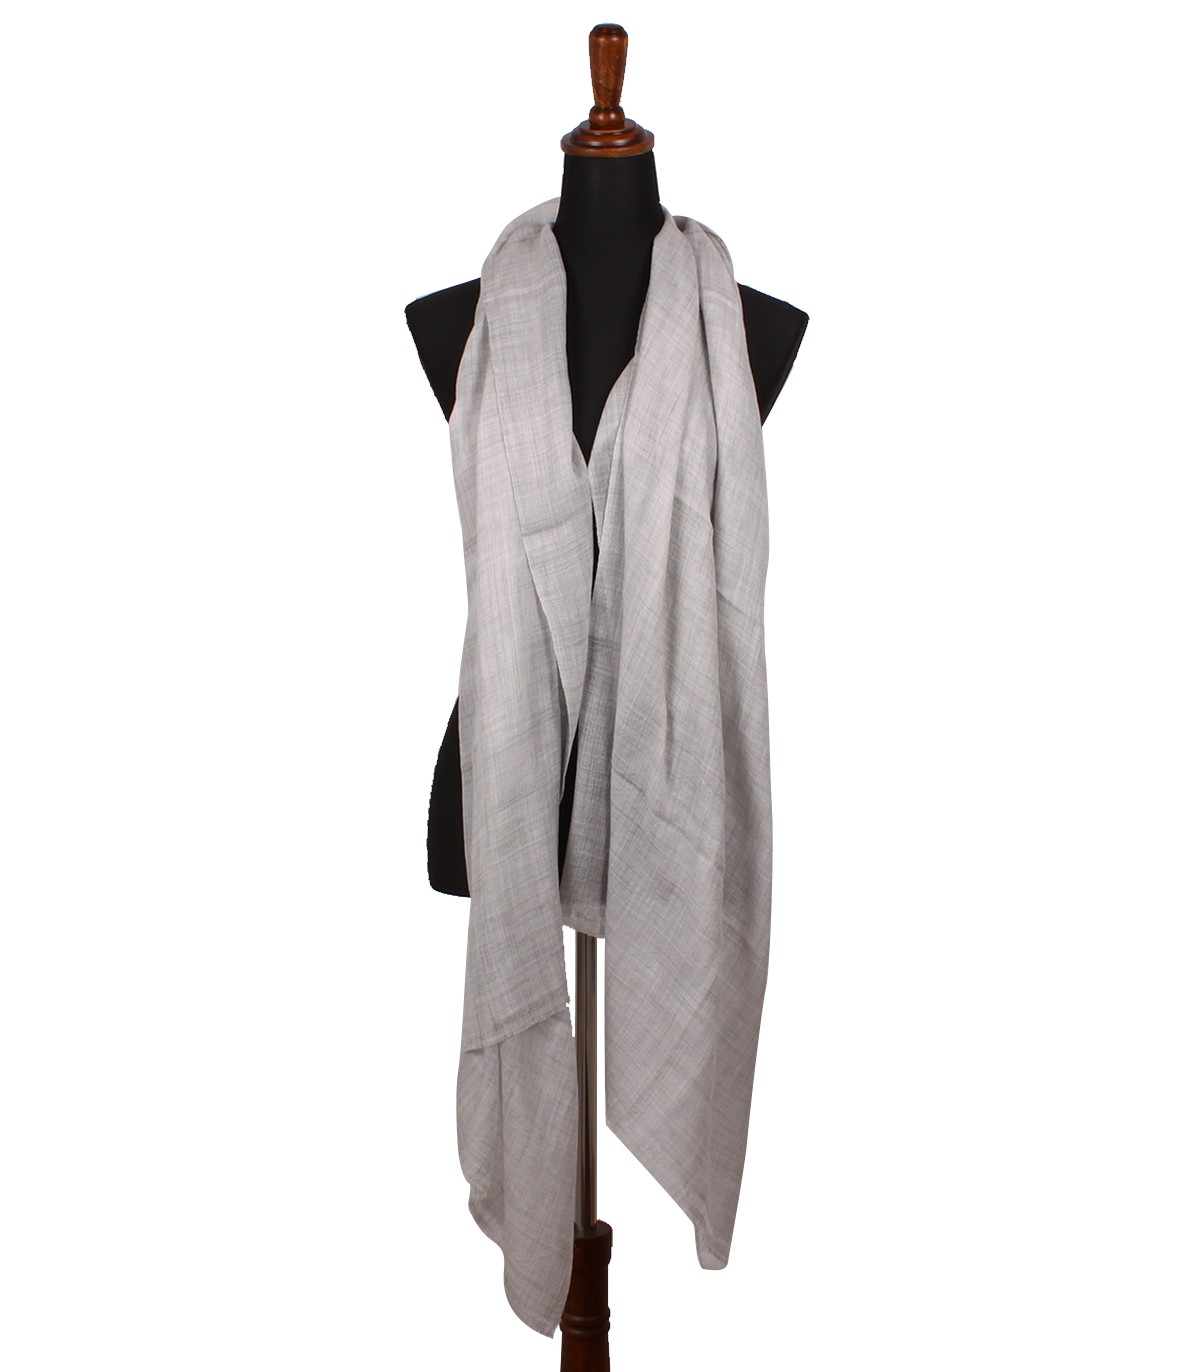 Light Grey Cashmere Wraps From Nepal| Online Cheap Pashima Shawls